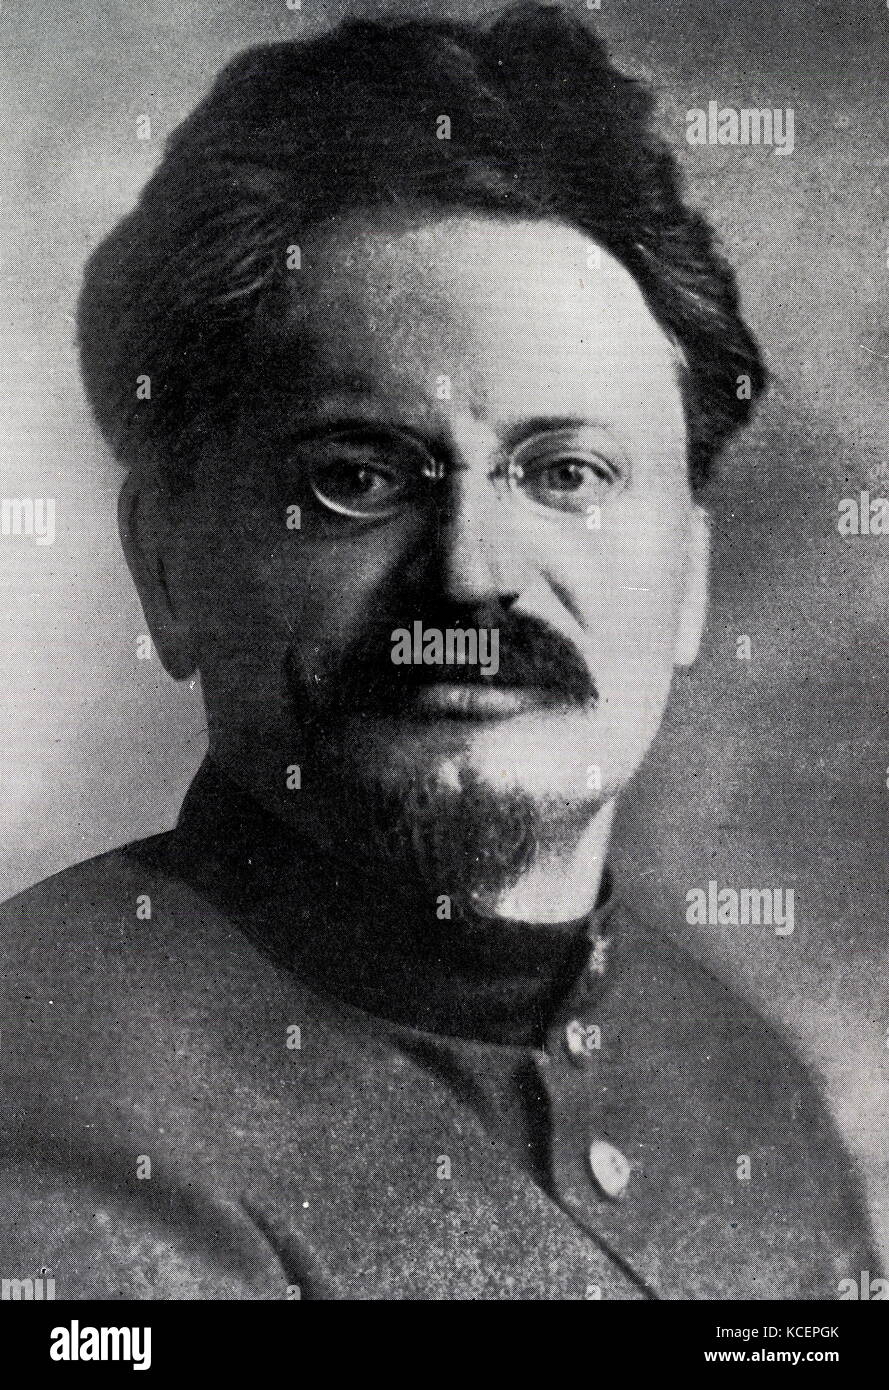 Photograph of Leon Trotsky (1879-1940) a Marxist revolutionary and theorist, Soviet politician and founding leader of the Red Army. Dated 20th Century Stock Photo